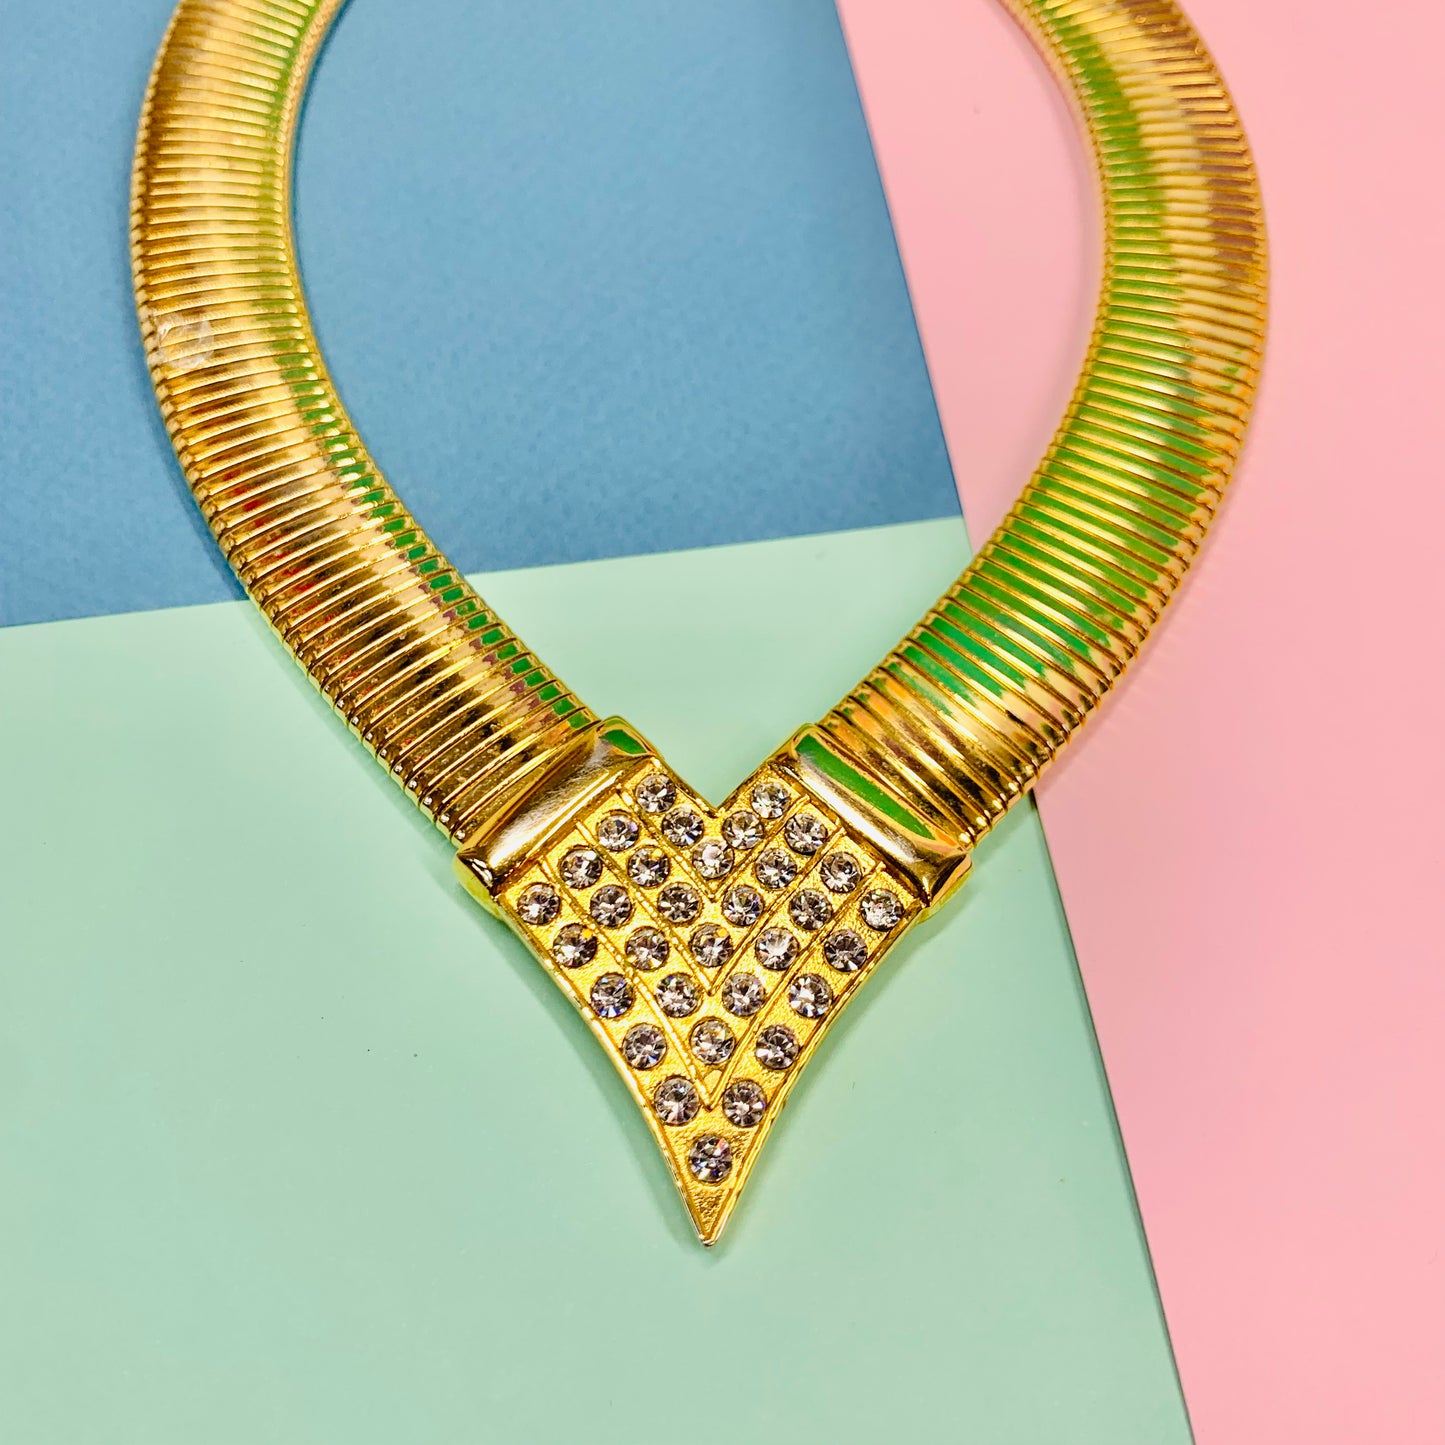 Extremely rare 1960s mesh gold plated statement necklace with rhinestones chevron pendant